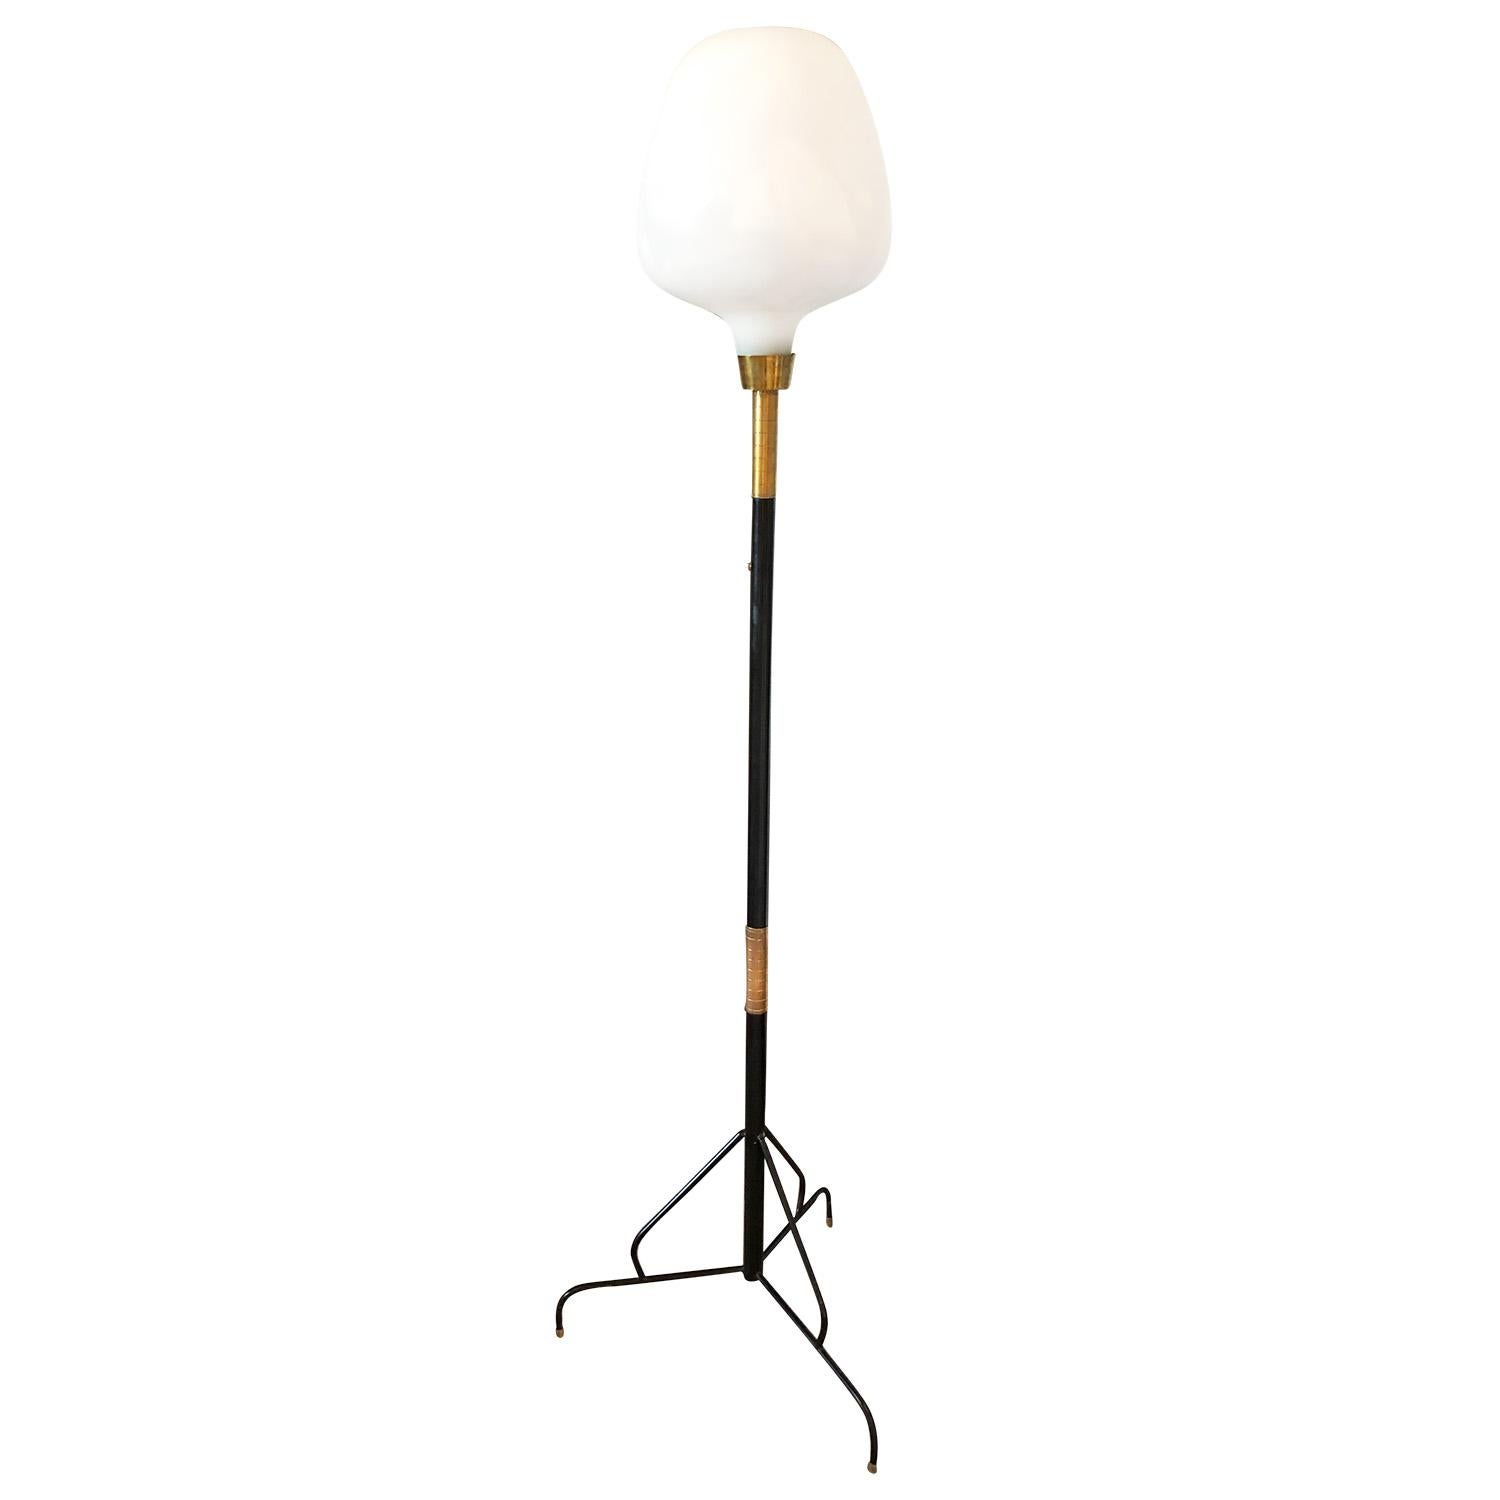 A vintage Mid-Century Modern Italian floor lamp made of hand crafted lacquered metal and brass with one frosted opal glass shade, featuring a one light socket, standing on three slightly curved metal legs, in good condition. The shade is slightly